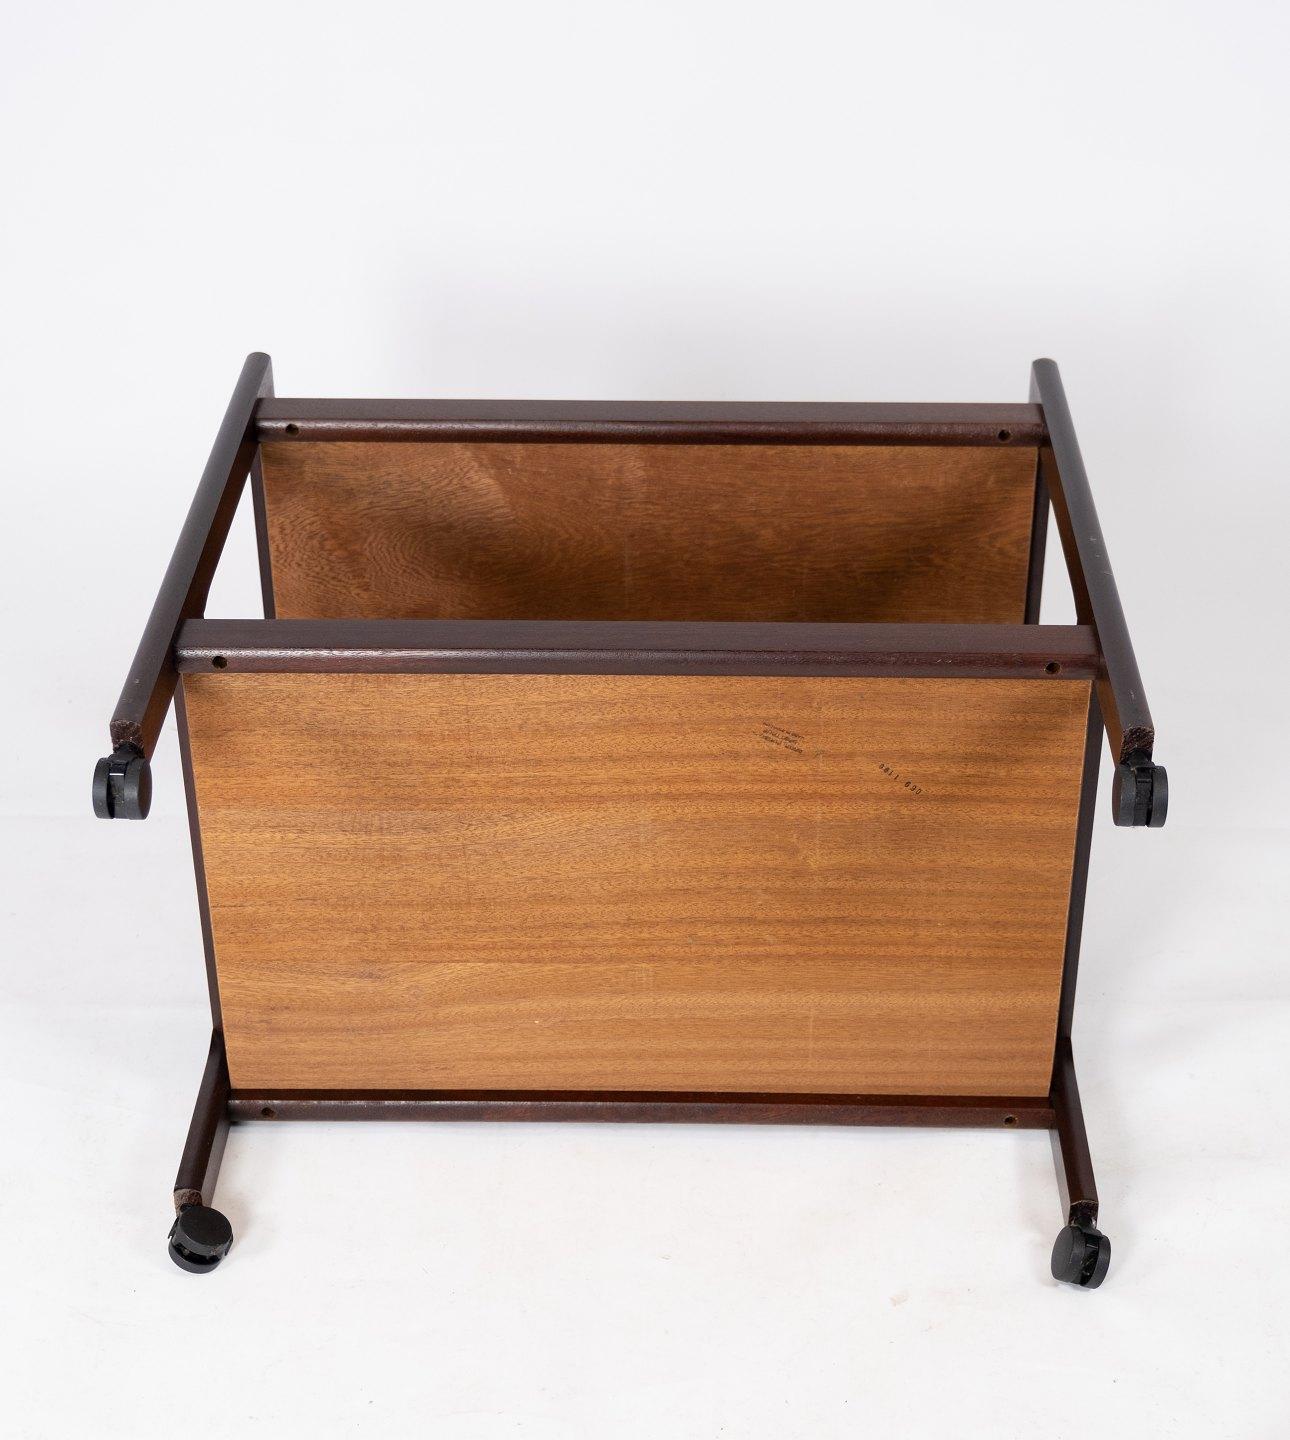 Trolley Table Made In Mahogany, Danish Design From 1960s For Sale 3